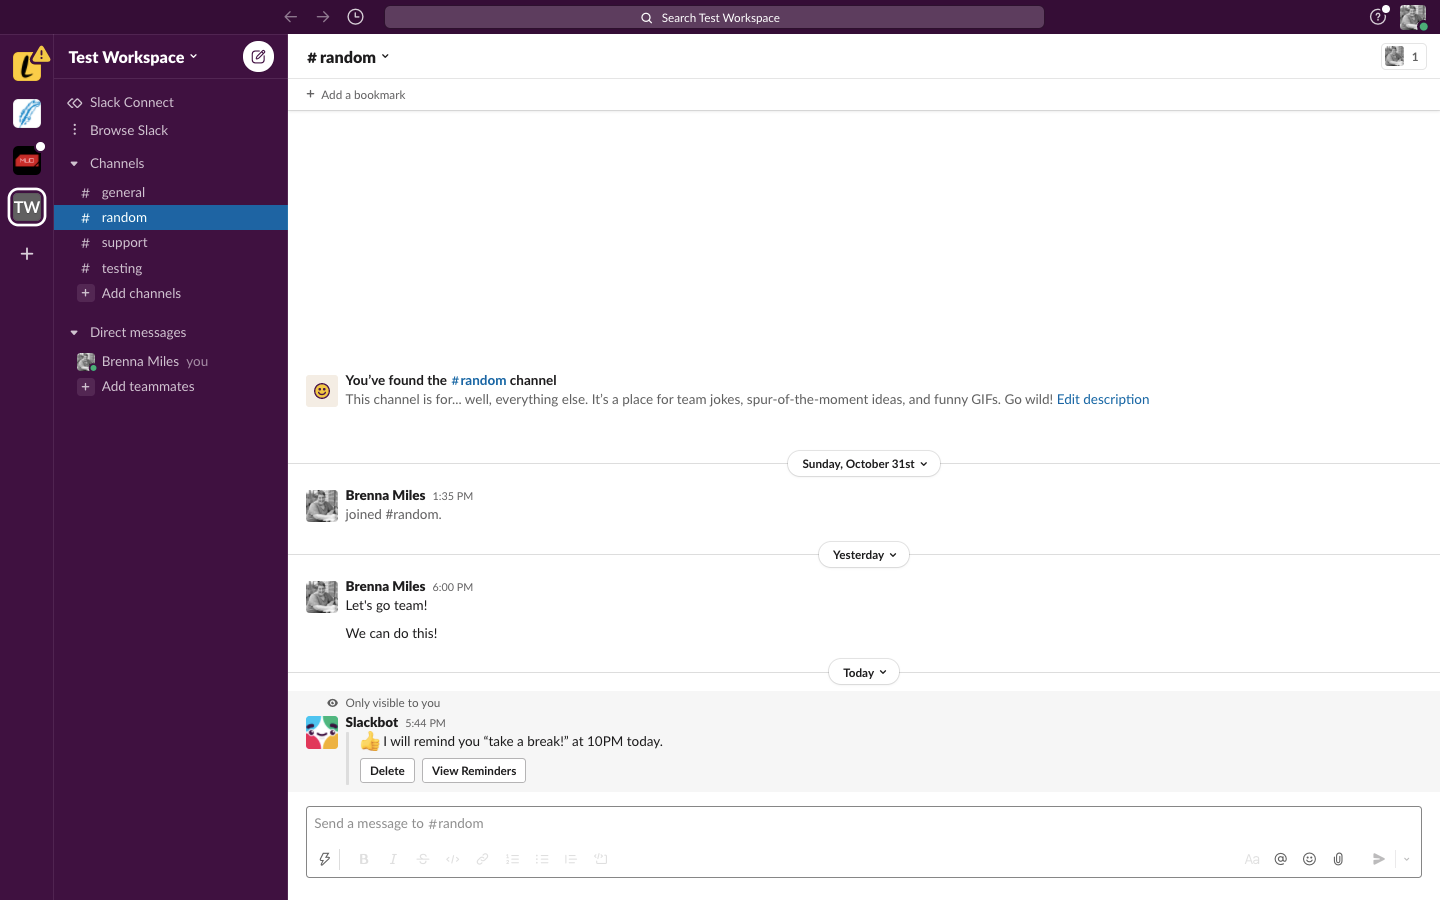 Image shows a Slack reminder in the message field